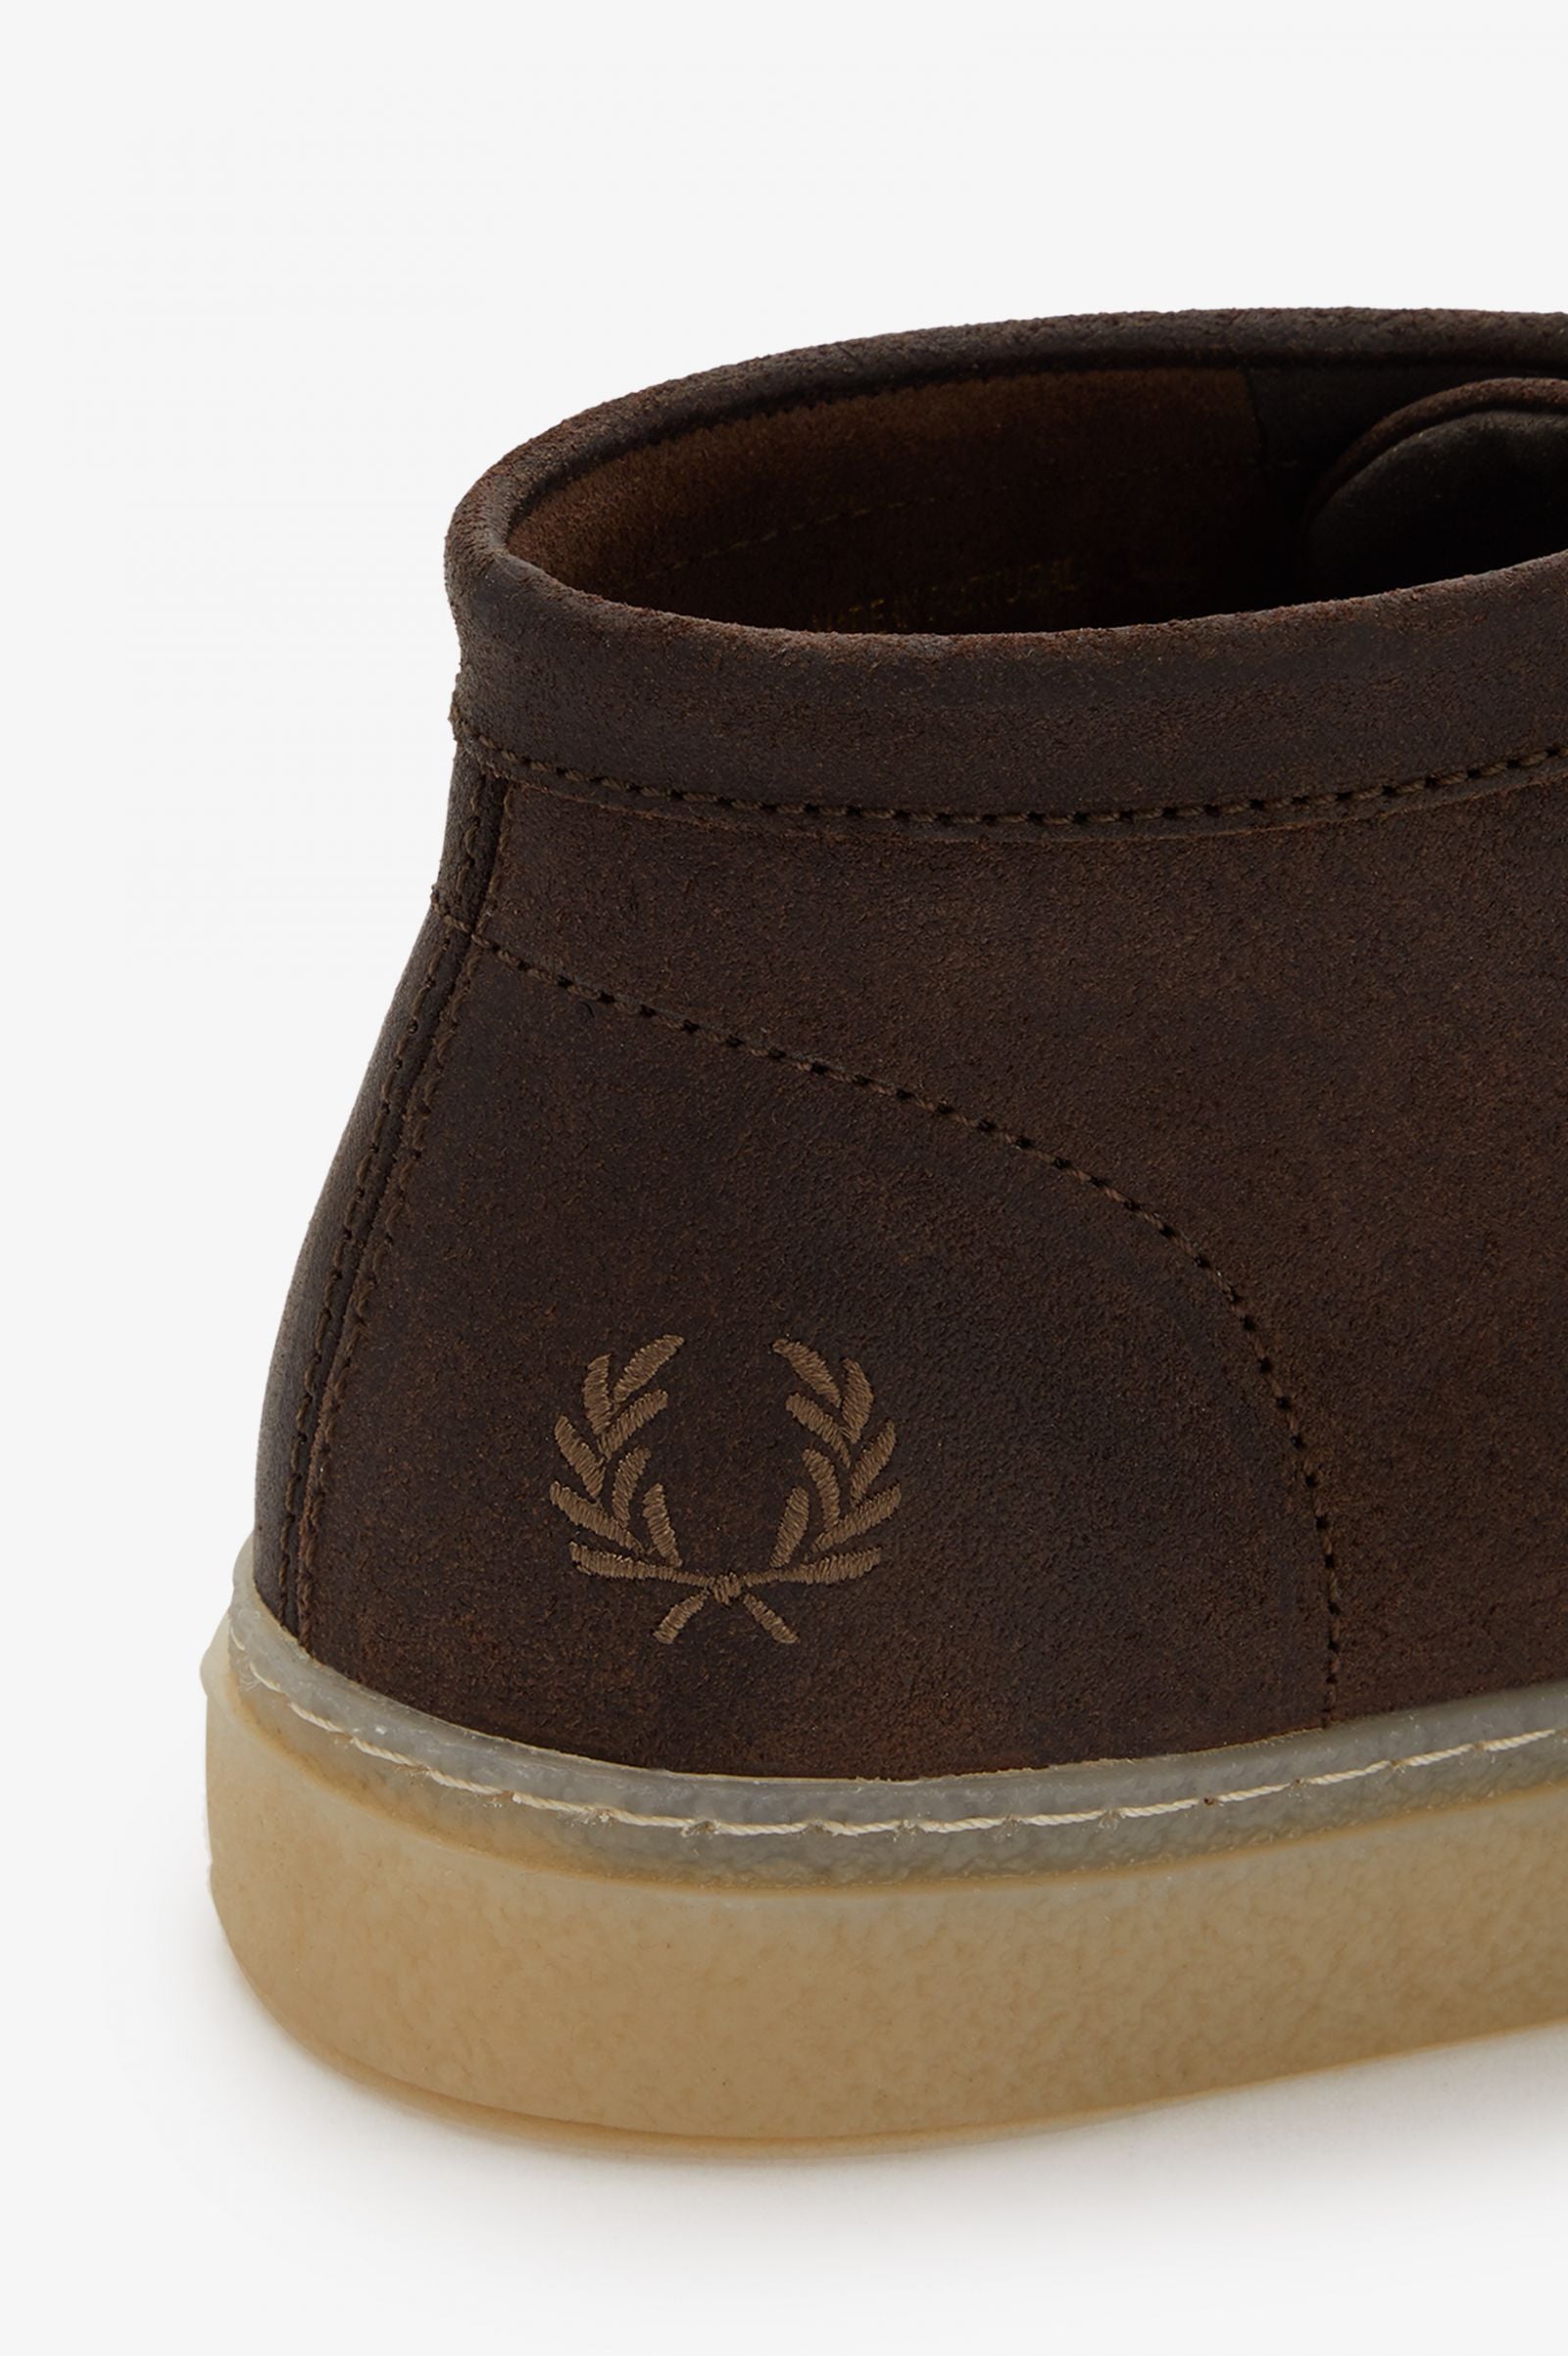 FRED PERRY DAWSON MID WAXED SUEDE - BURNT TOBACCO – Prime